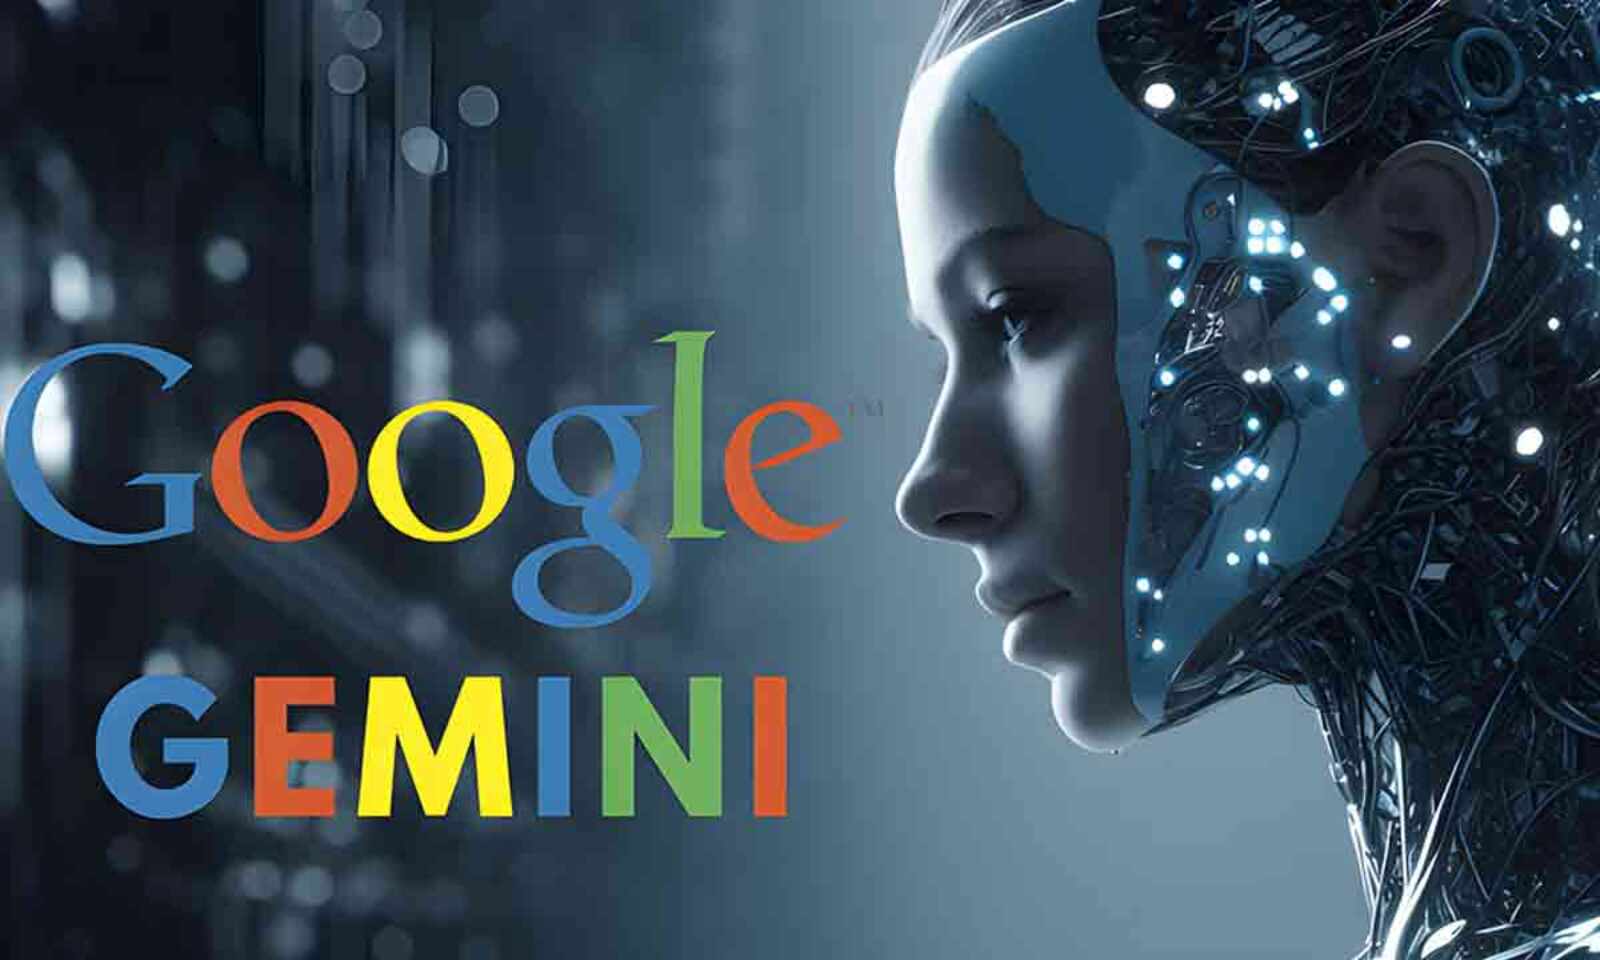 Google's Gemini Video Search Demo Faces Scrutiny Over Staged Elements